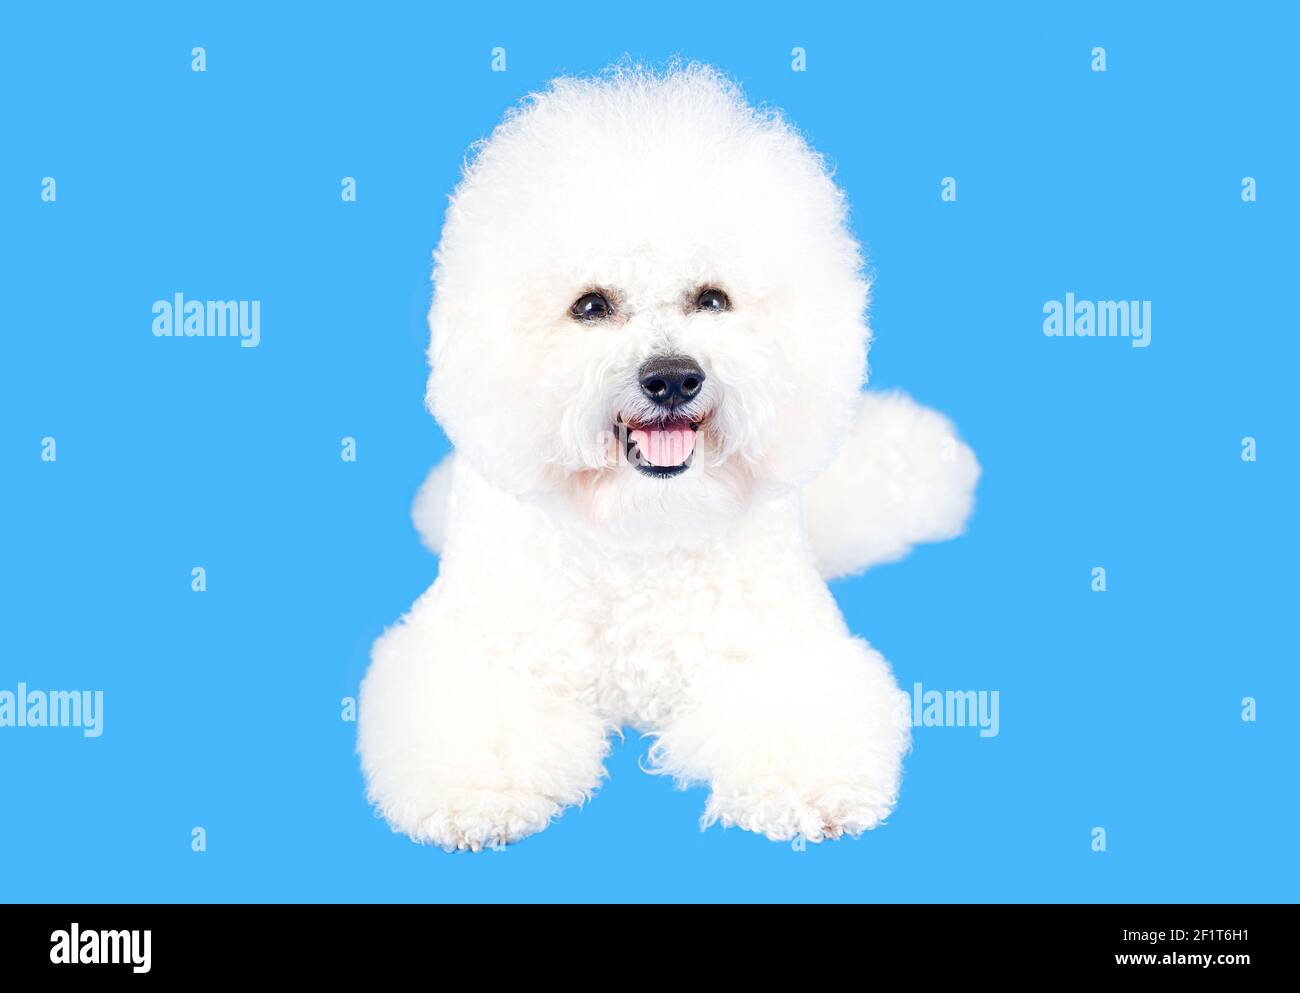 Front view of a fluffy Bichon Frise dog posing on a blue background. Studio shot, copy space. Stock Photo